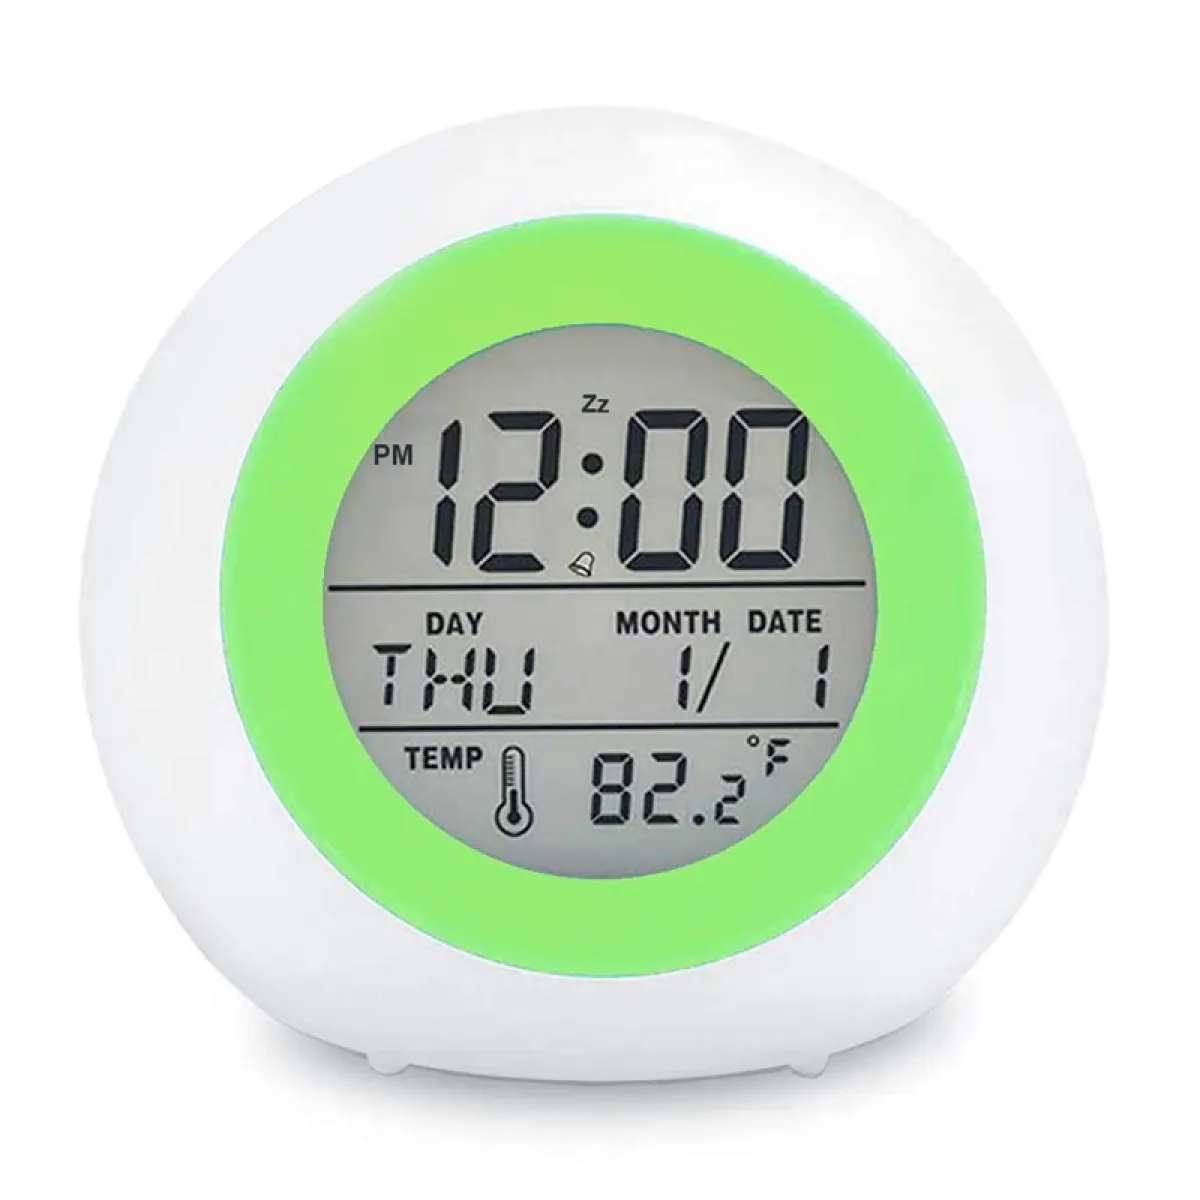 Kids Alarm Clock 7 Color Changing Night Light Wake Up Clock Bedroom Bedside With Temperature Touch Control And Snooze Lazada